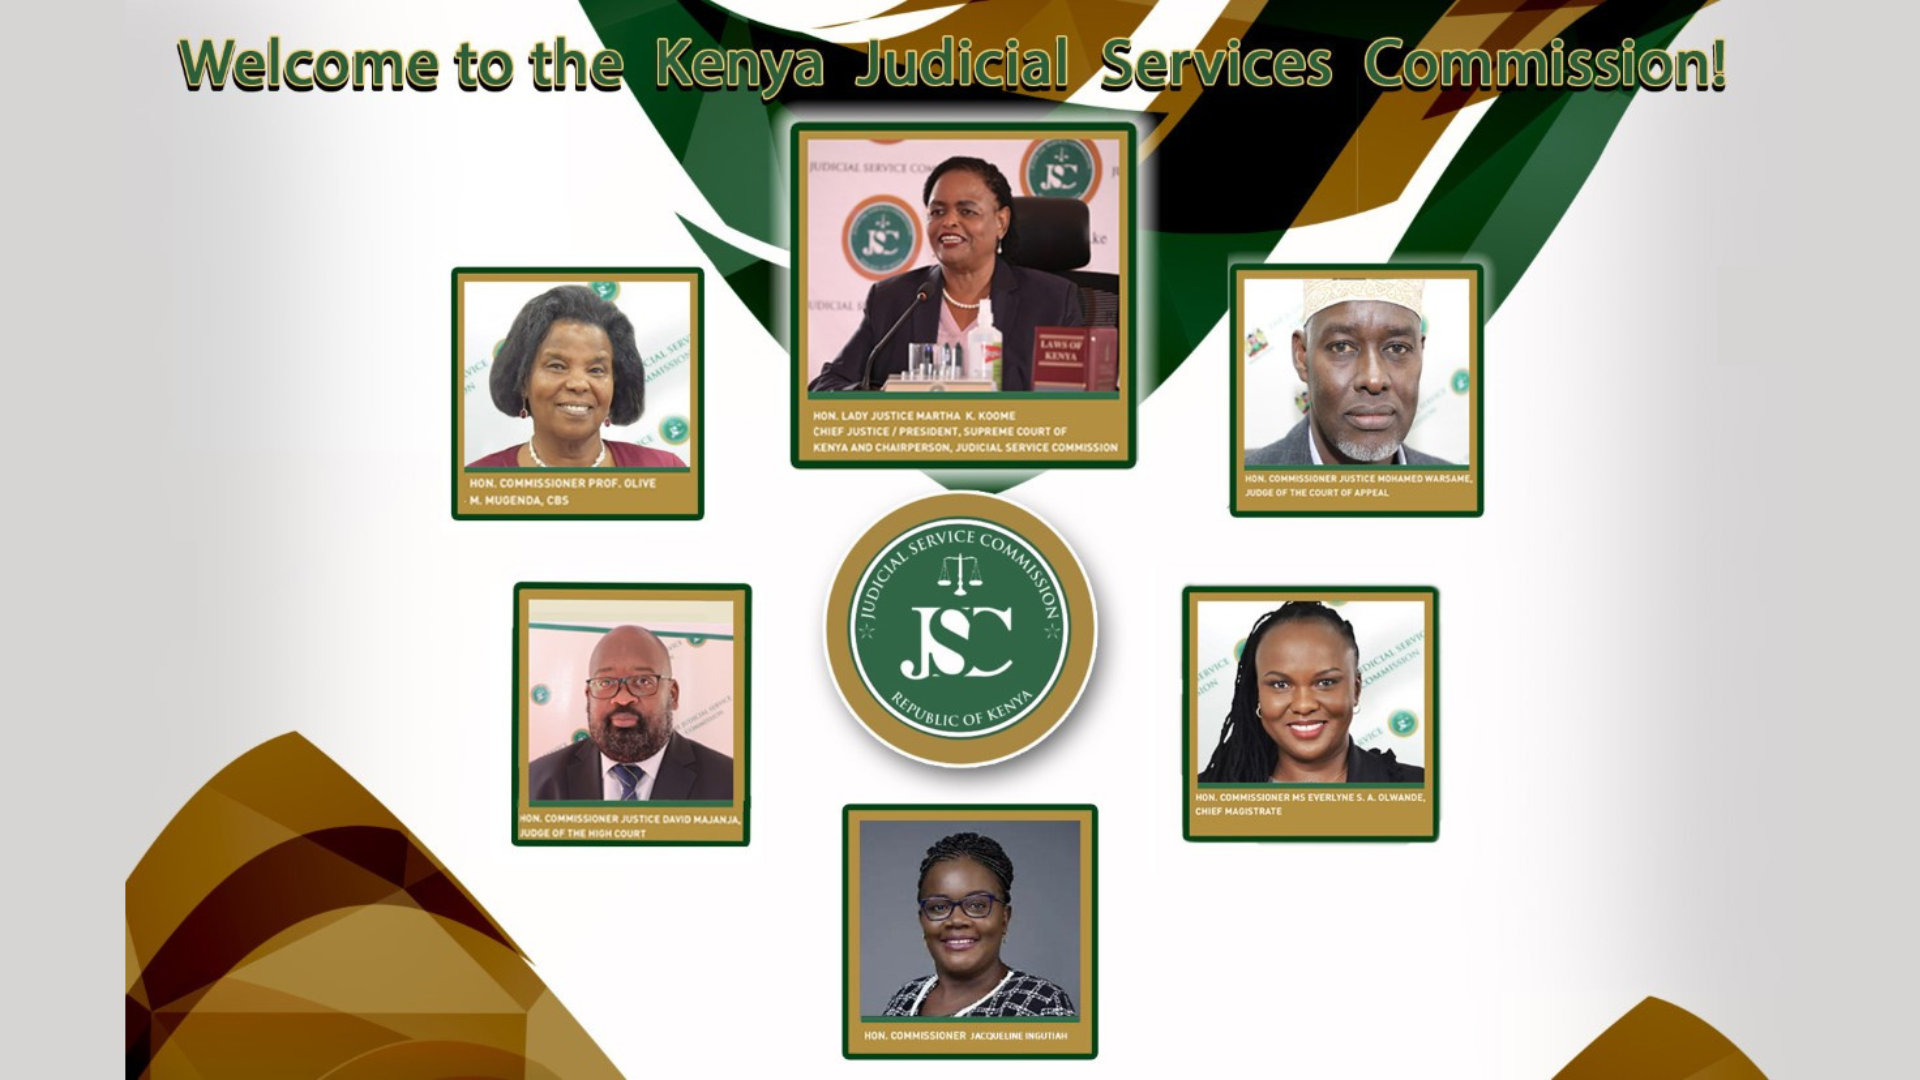 Welcome to the Kenya Judicial Services Commission